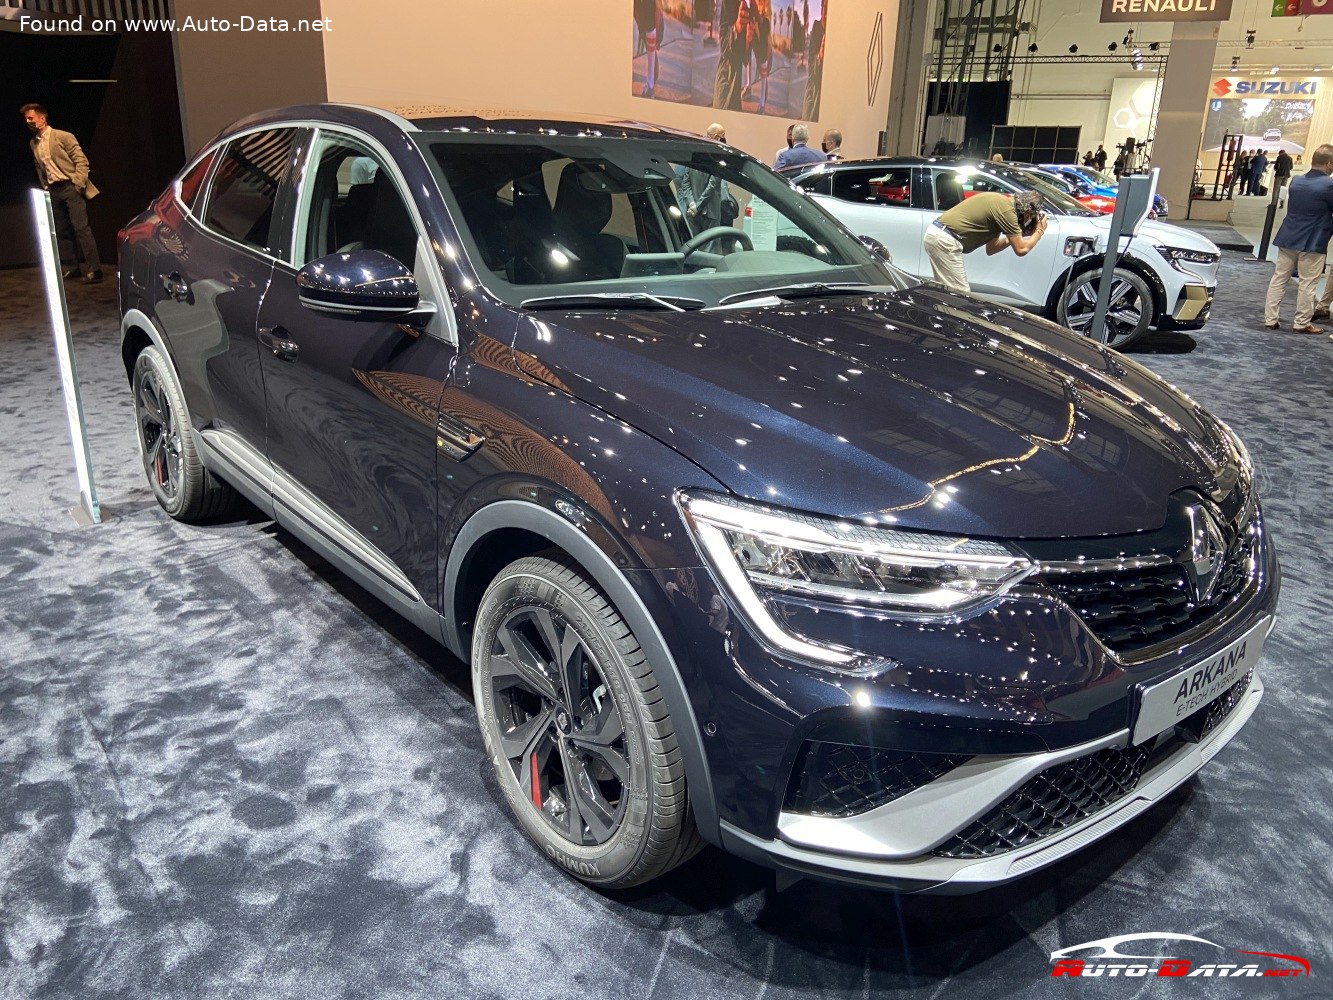 Renault Arkana Finally Coming To Europe In 2021 With All-Hybrid Lineup